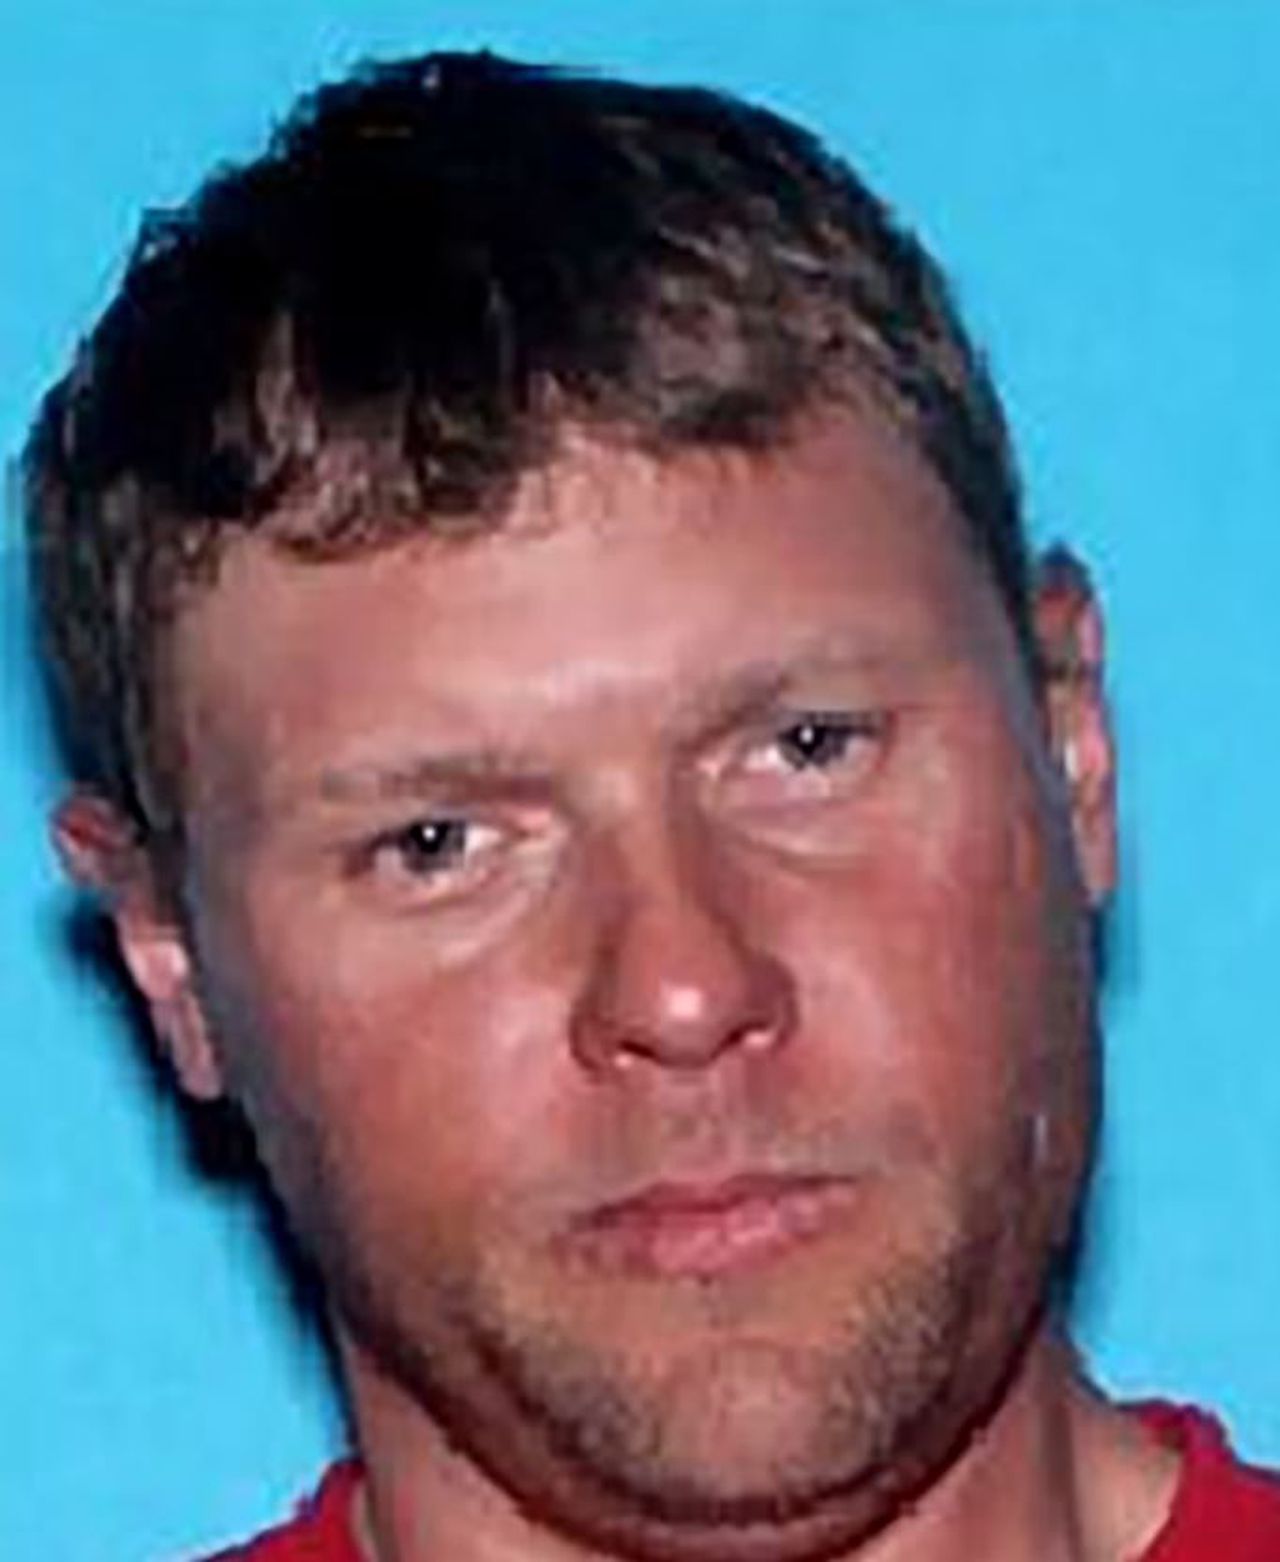 Search Underway For 37 Year Old Man Missing From Opelika